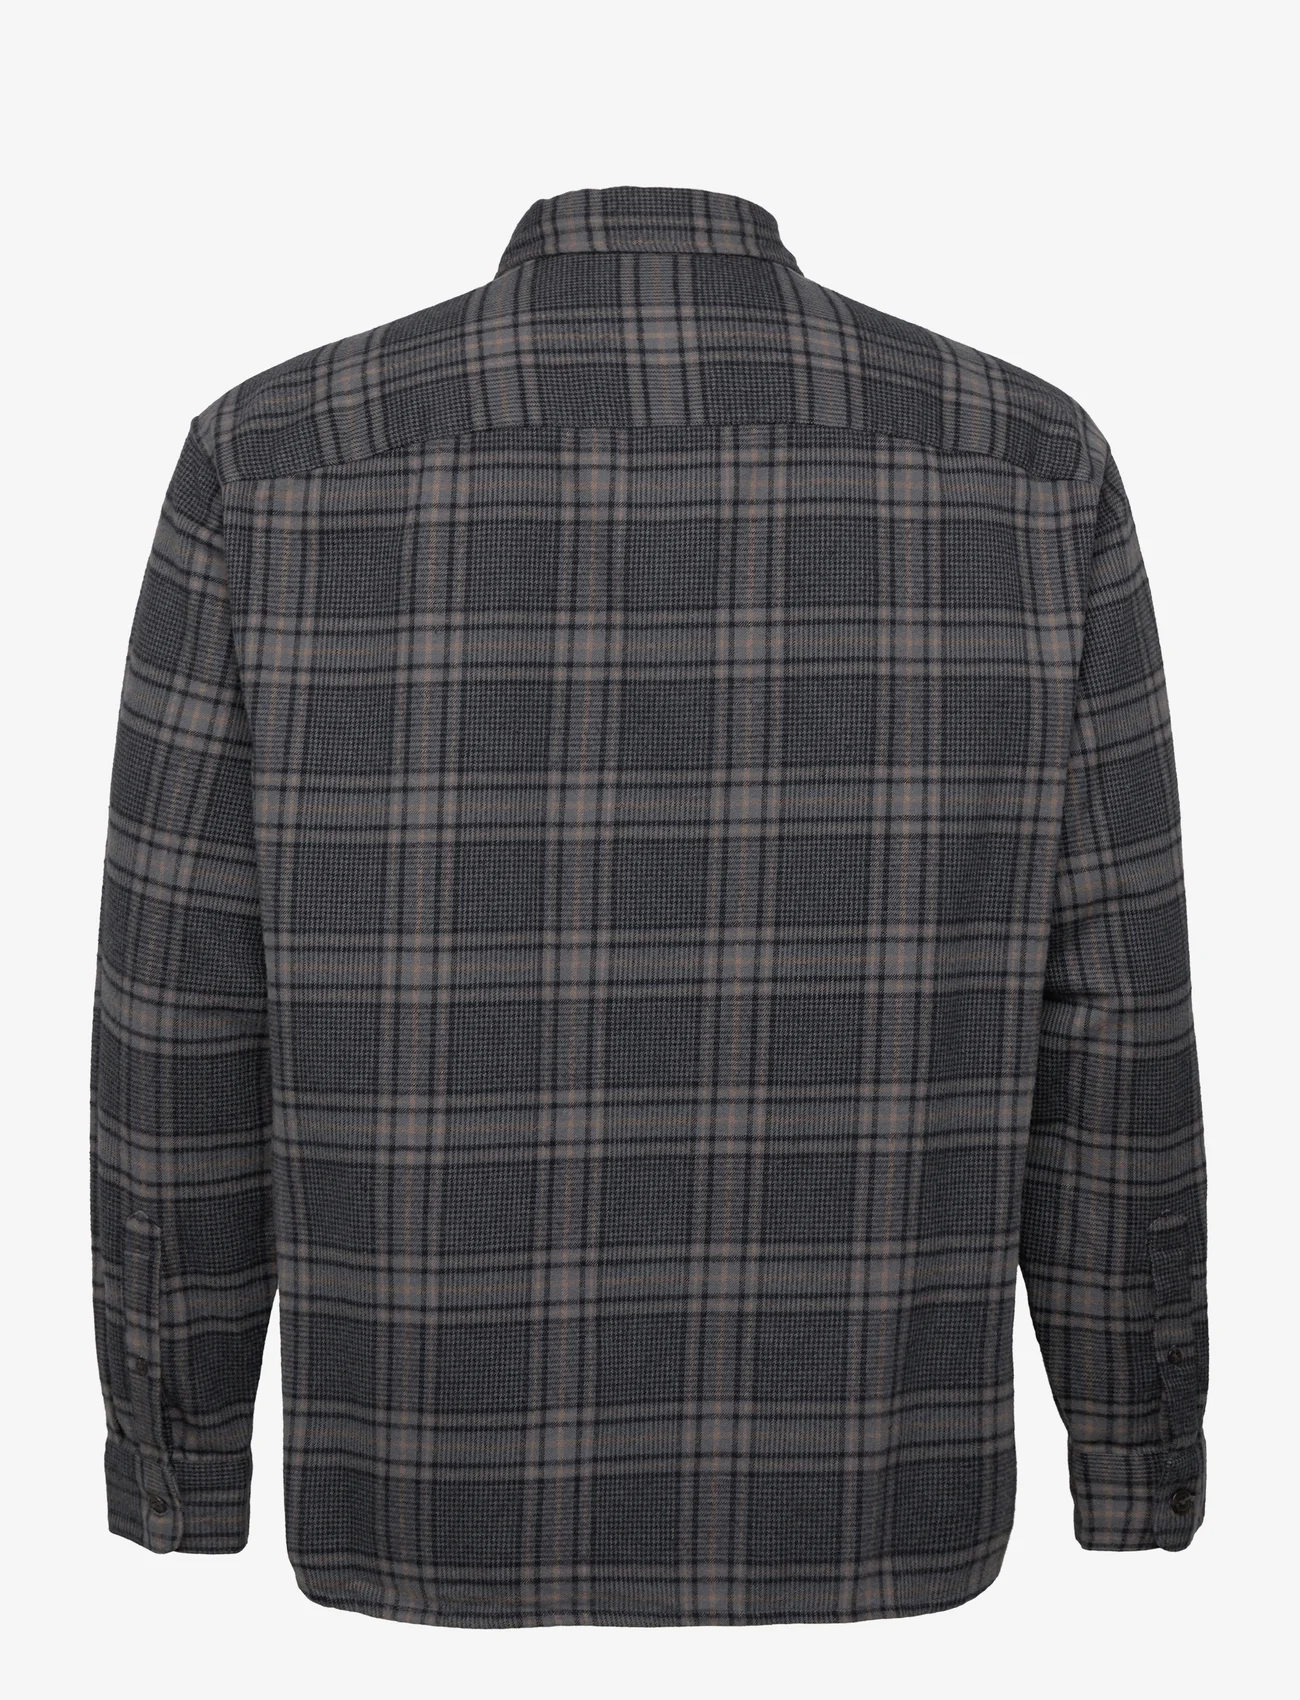 Abercrombie & Fitch - ANF MENS WOVENS - rutede skjorter - black plaid - 1